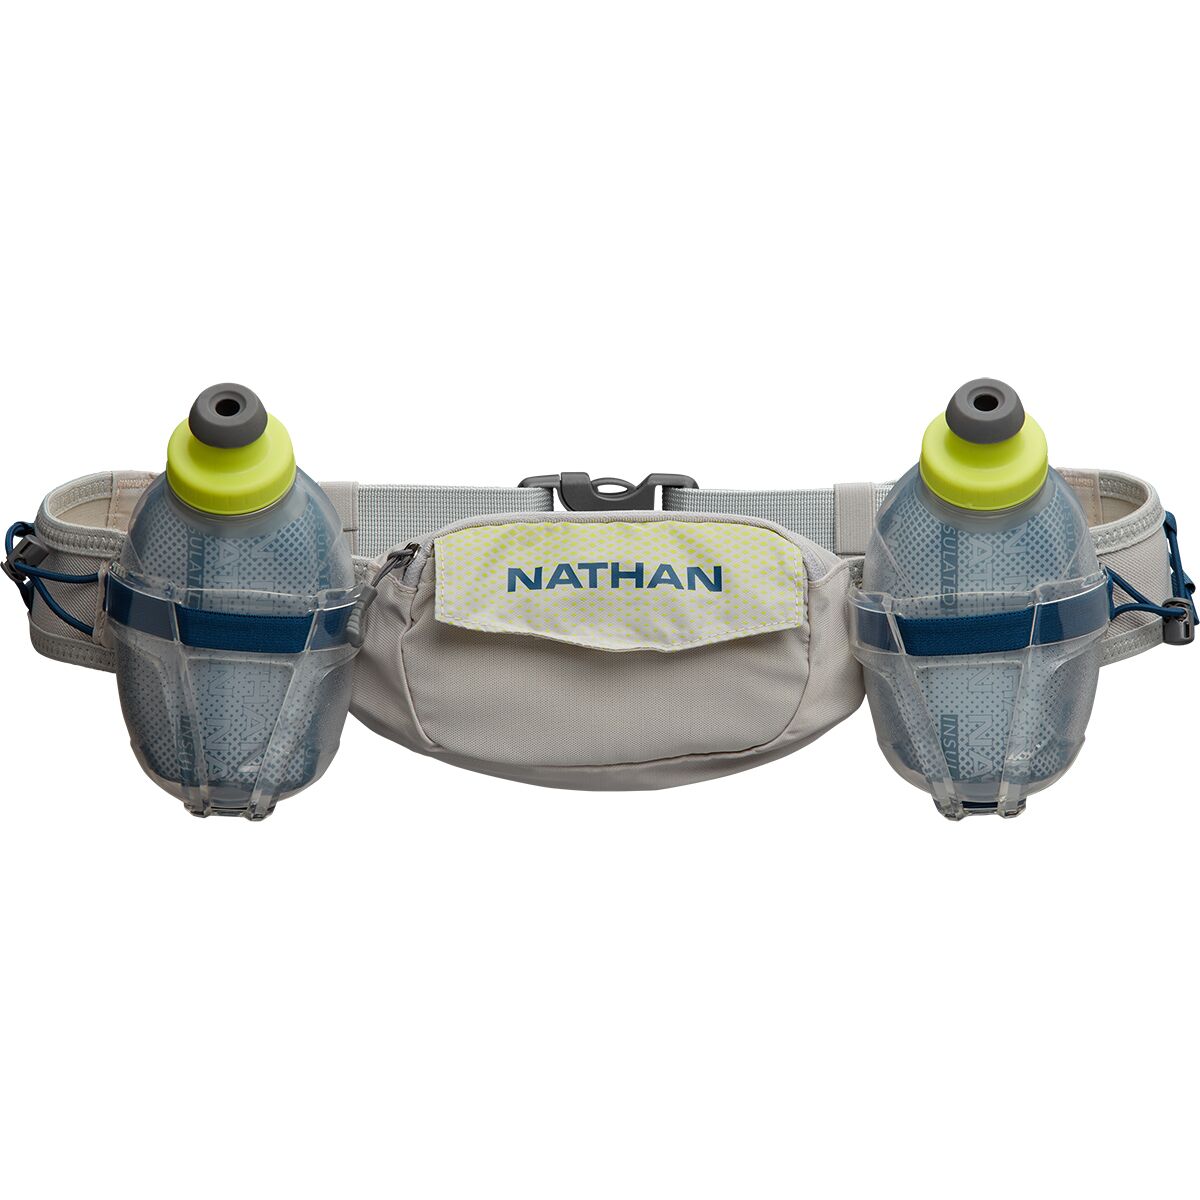 Nathan Trail Mix Plus 2.0 Insulated Hydration Belt